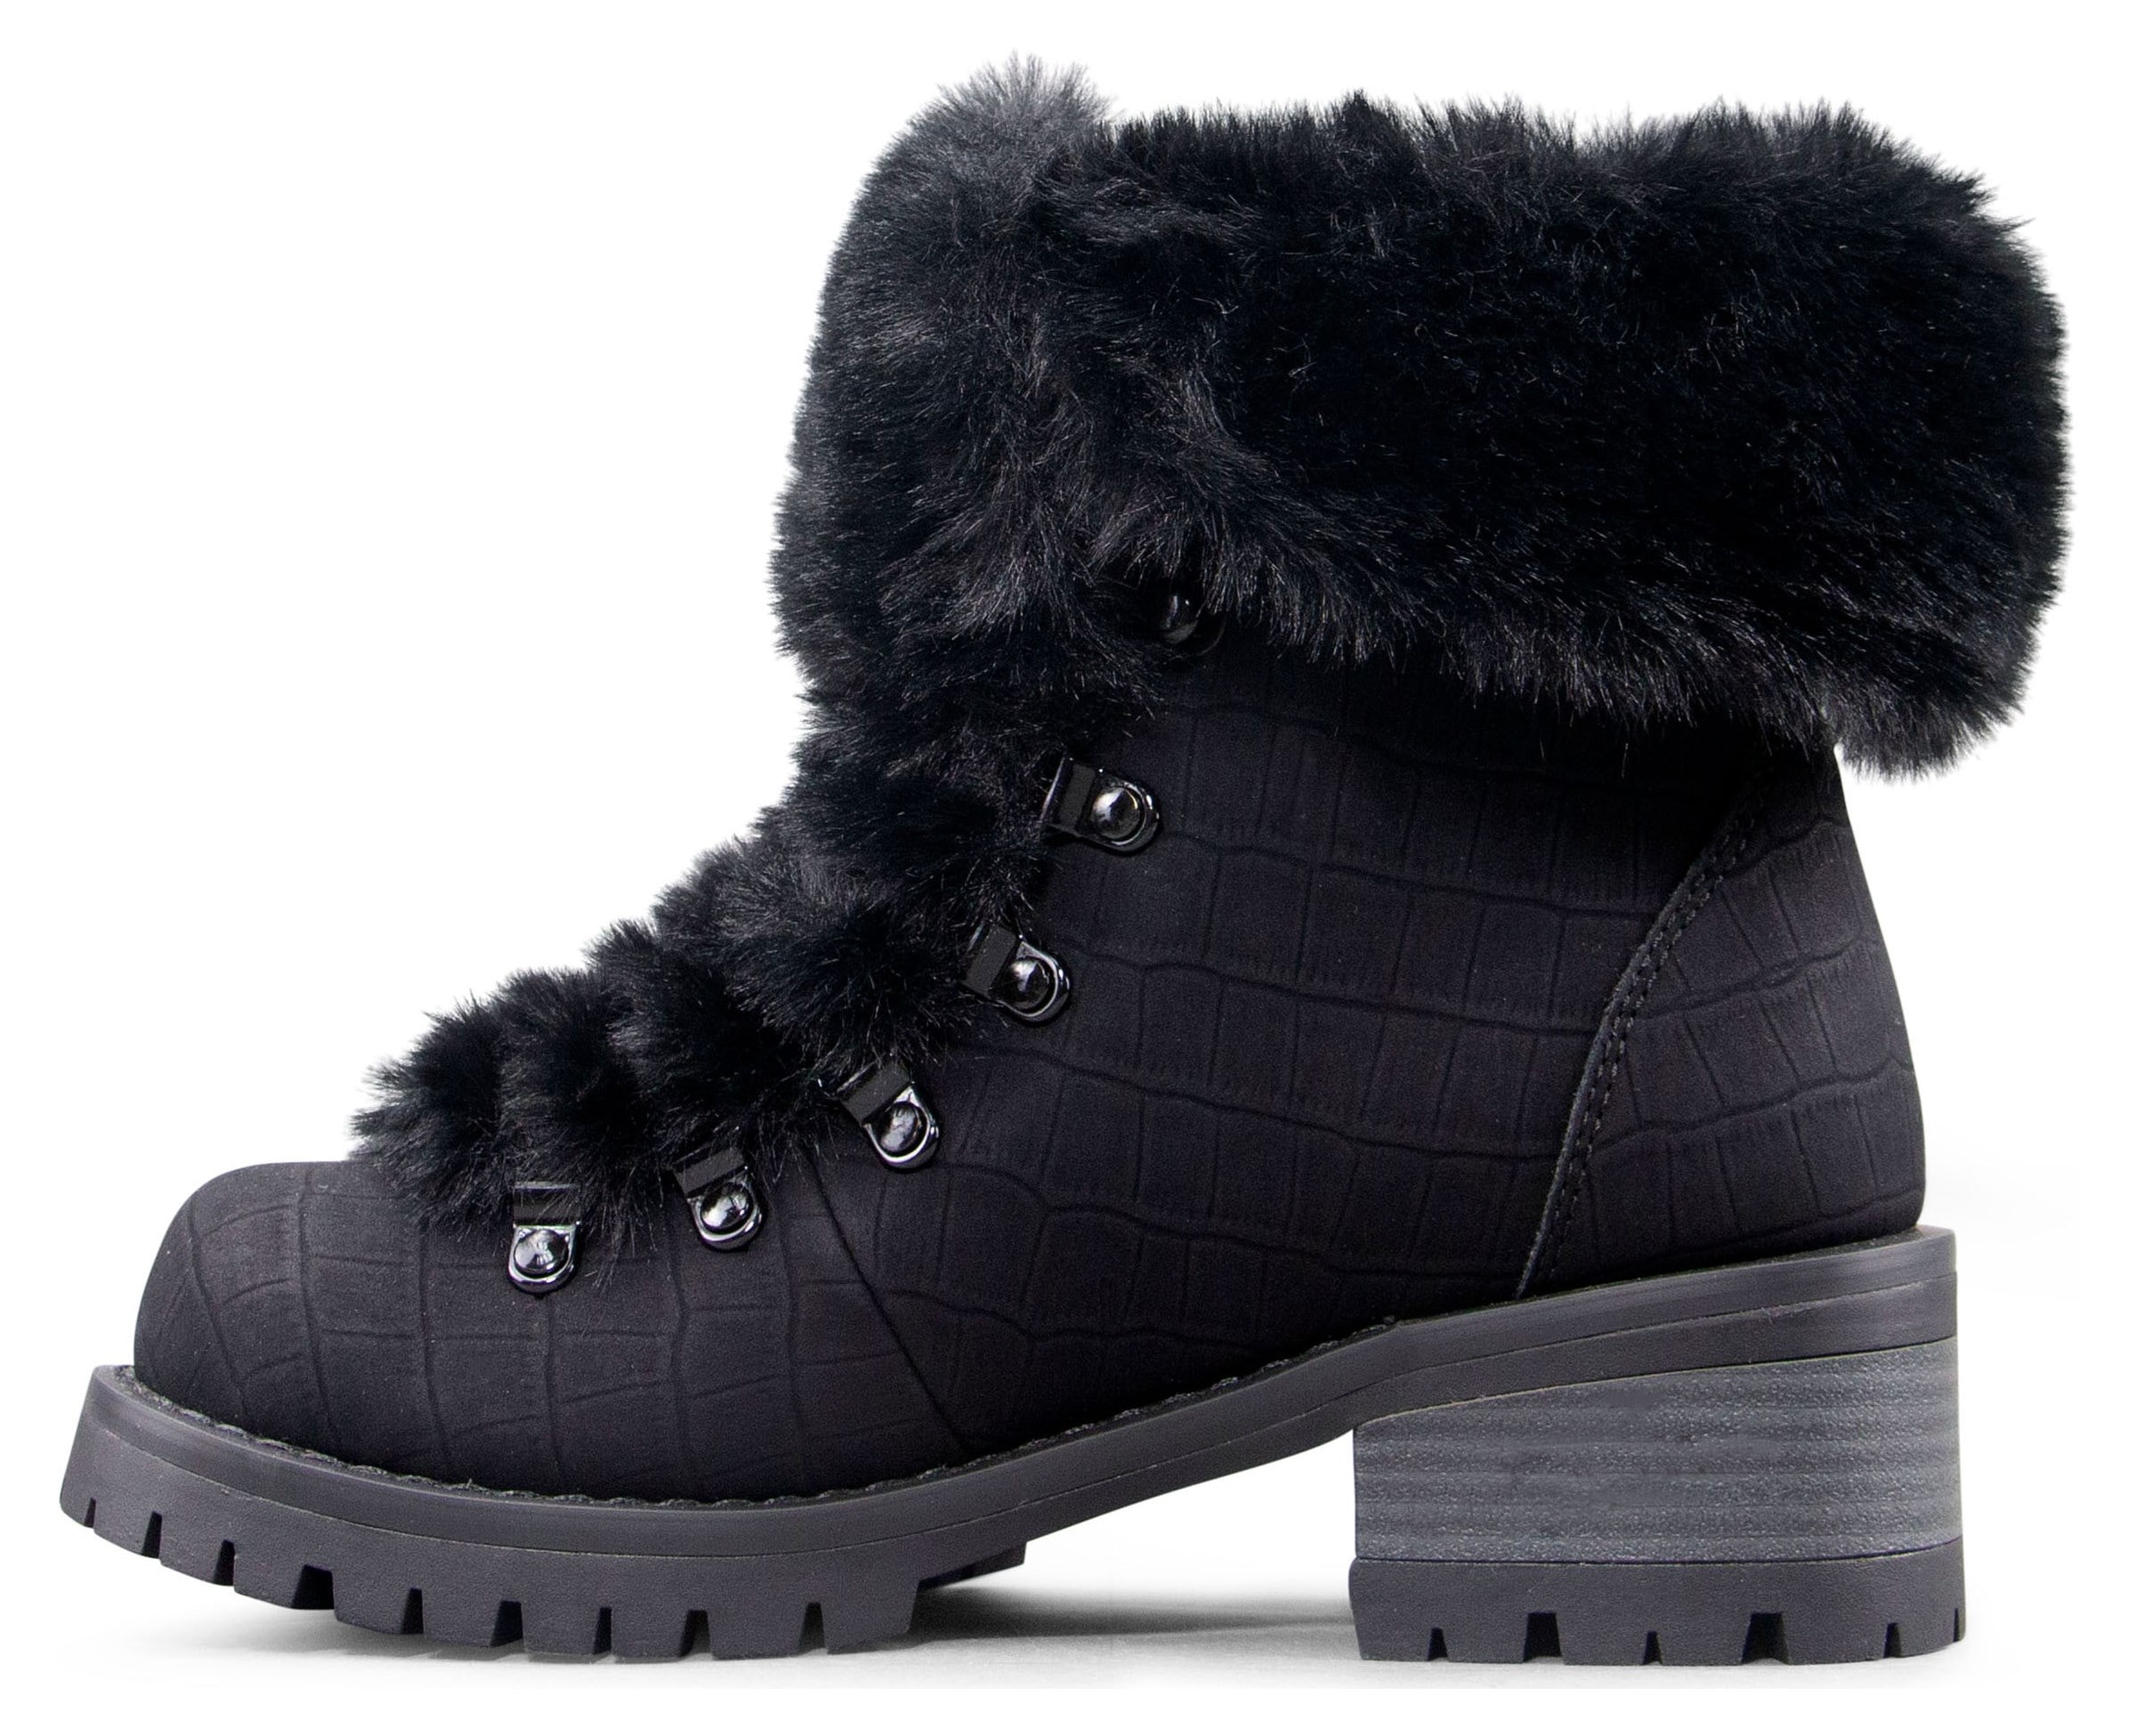  PPXID Women's Cute Pompon Lace Up Fur Winter Snow Boots  Sweetheart Princess Fluffy Boots-Black 5 US Size